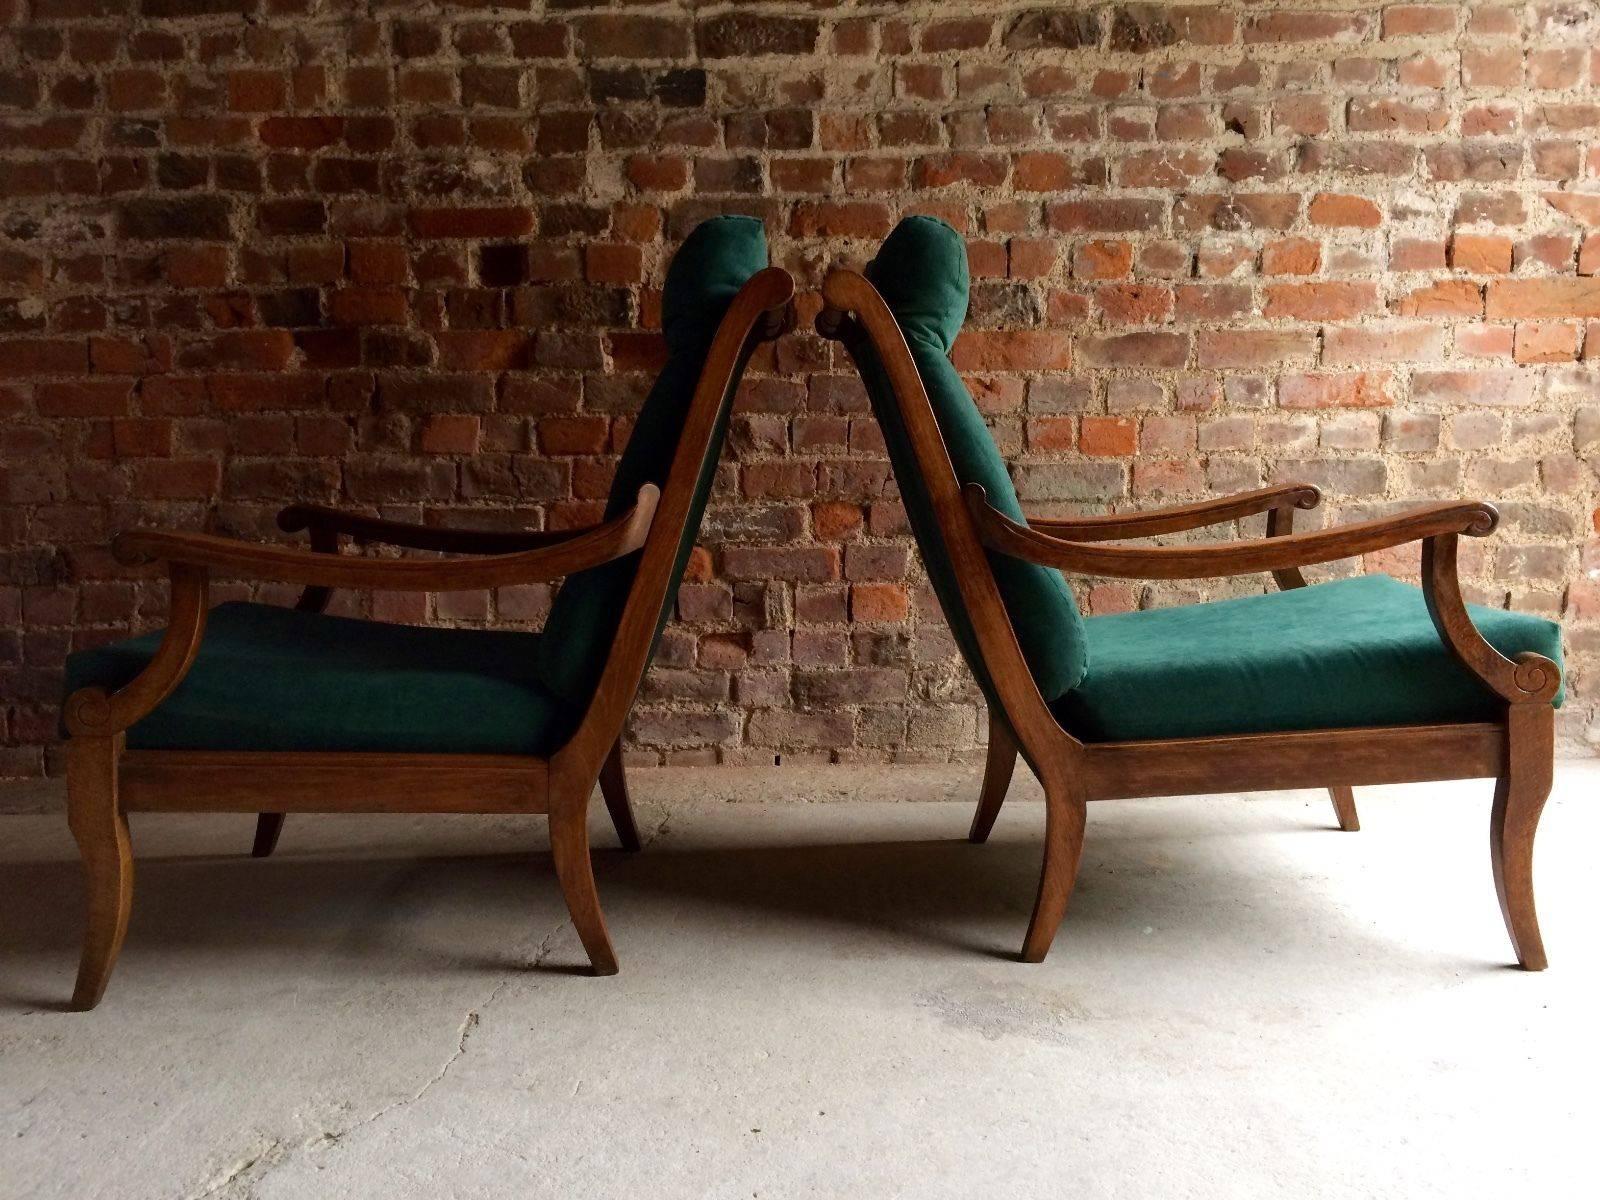 A stunning pair of recently reupholstered continental beech armchairs, late 19th century circa 1895, with fabulous down swept arm rests, on low sabre legs, with lush green button backed velvet style upholstery, extremely comfortable and offered in